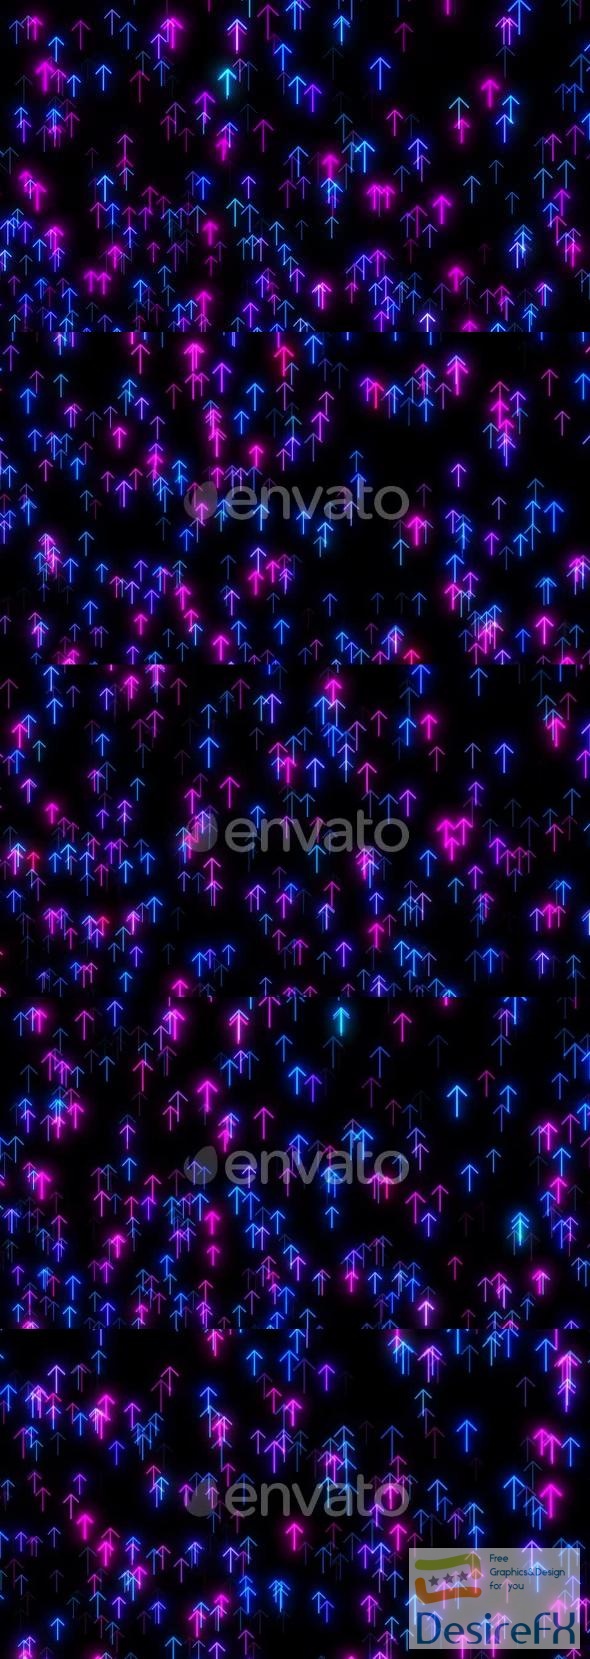 VideoHive Glowing Neon Arrows Direction Animation On Black Background, Neon Arrows Blinking On Black 47574749